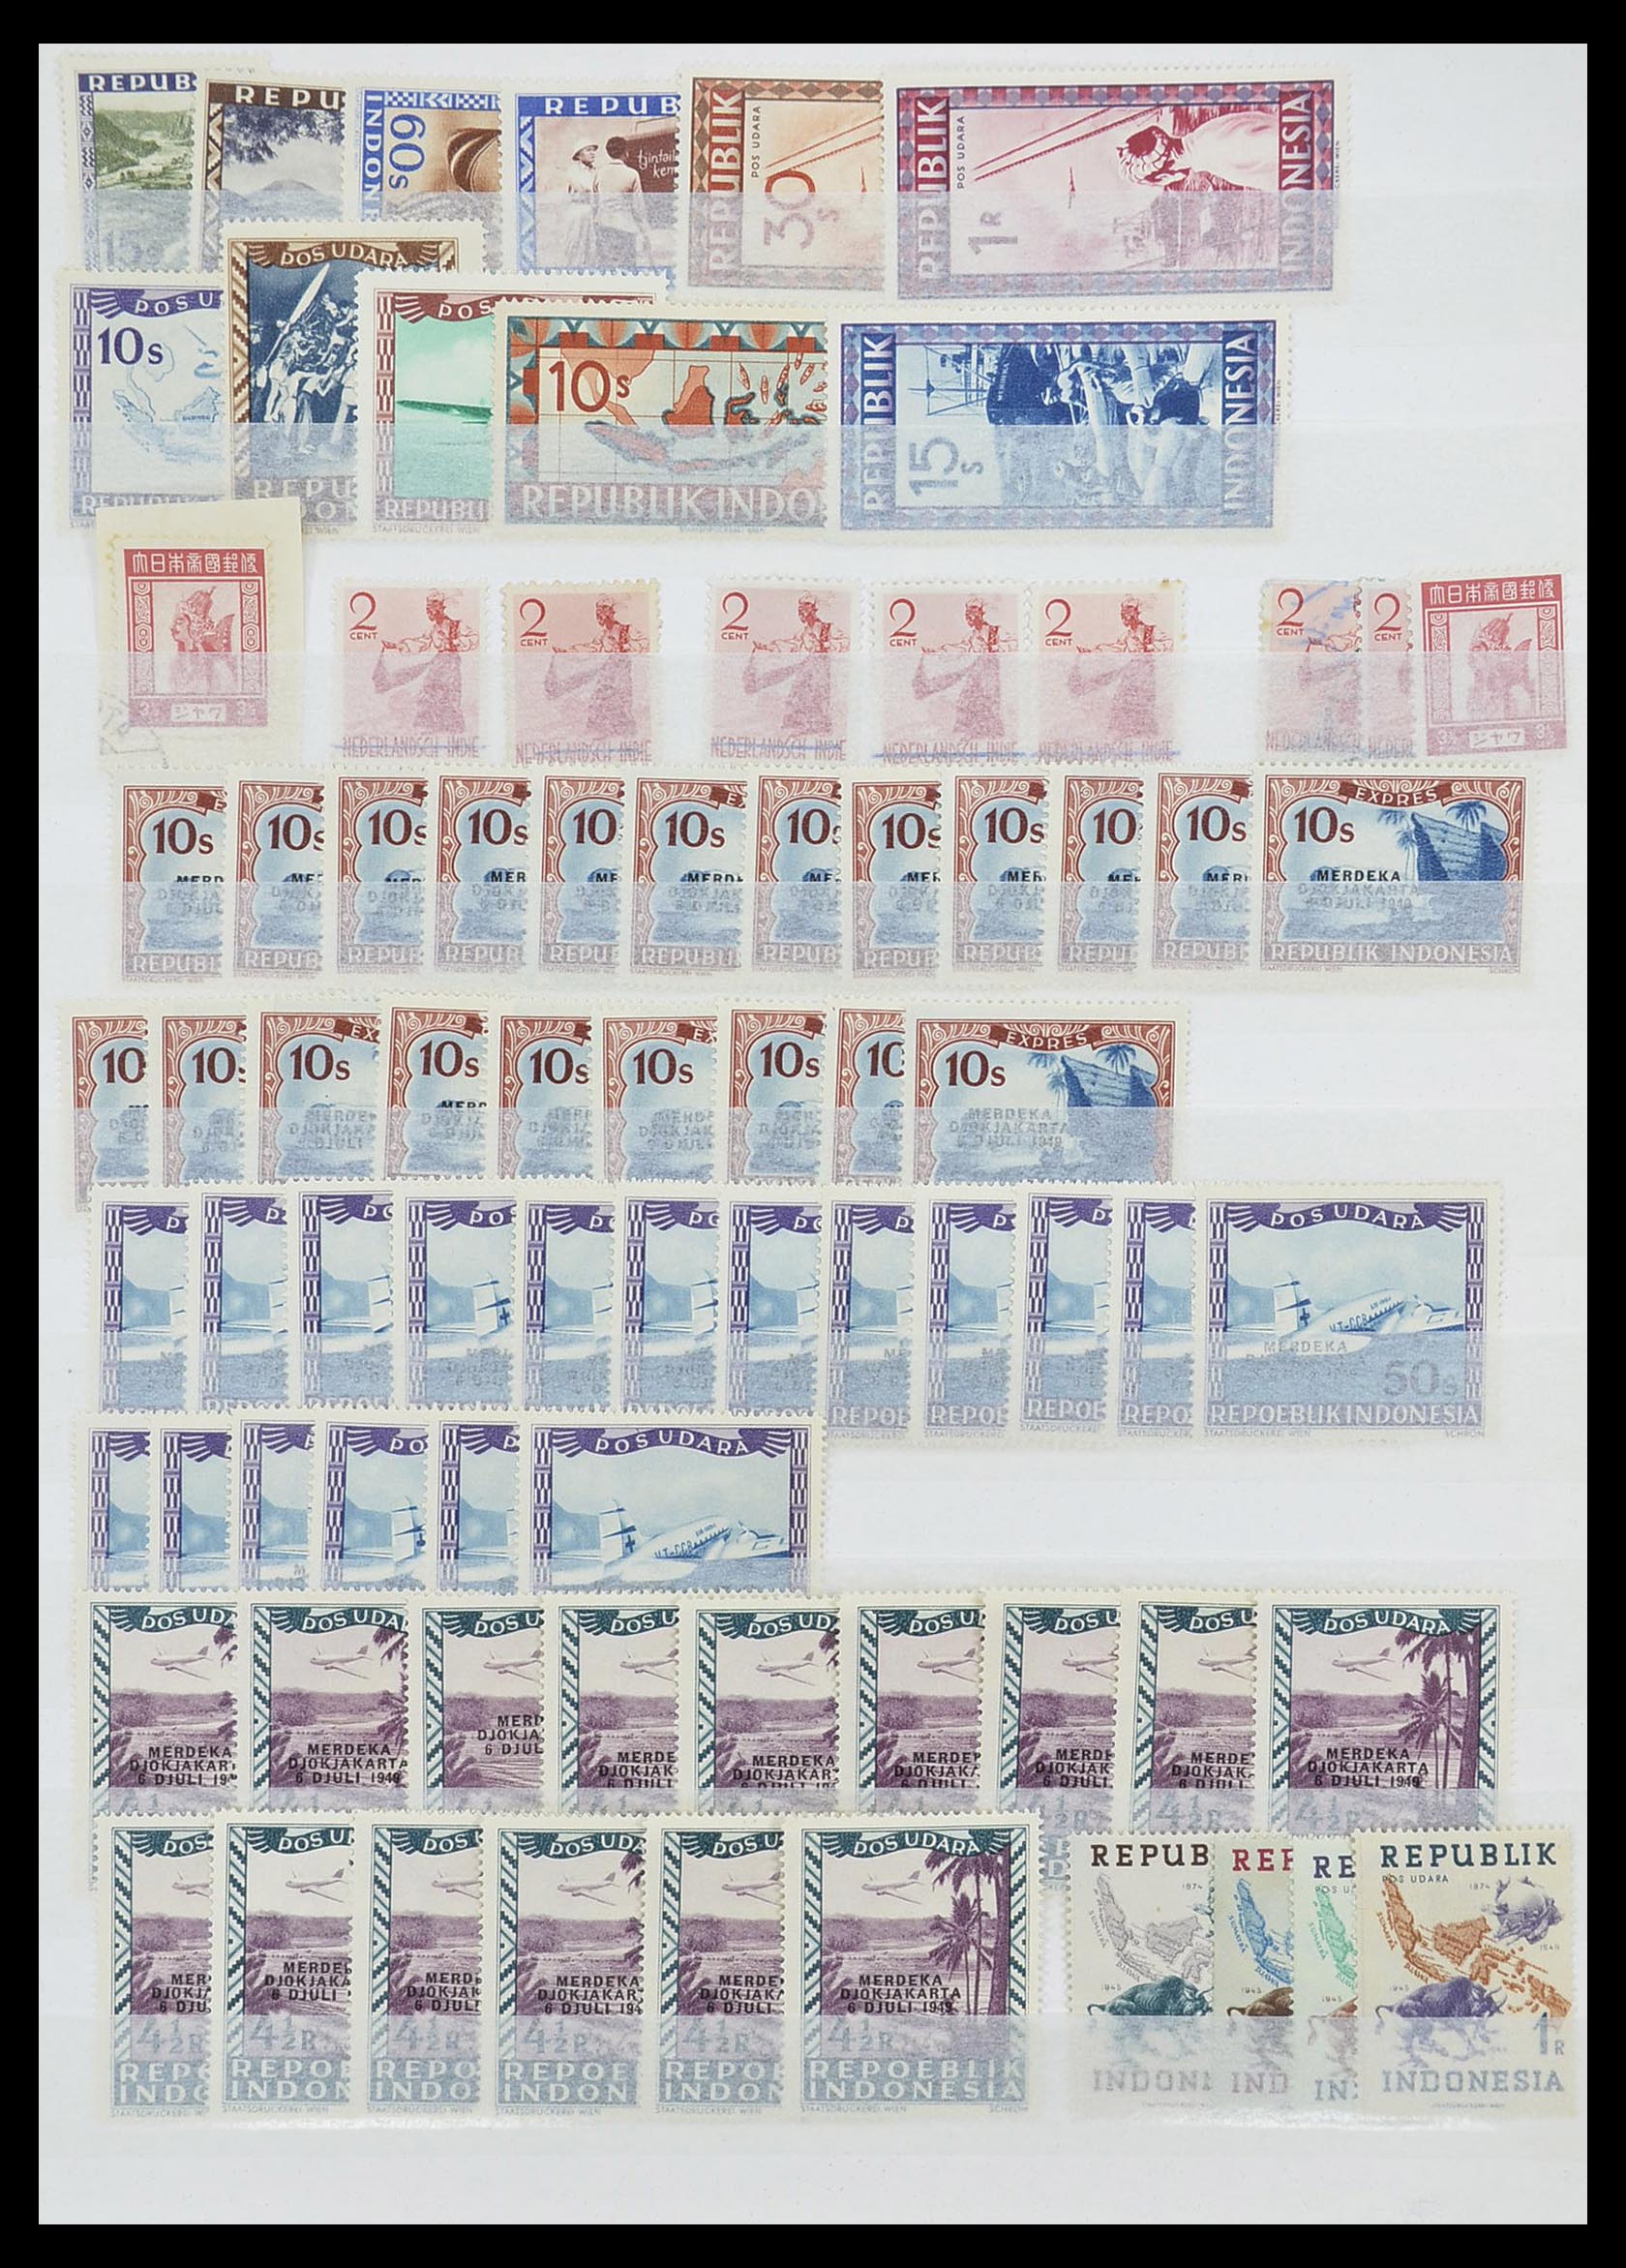 33489 009 - Stamp collection 33489 Japanese occupation Dutch east Indies and interim